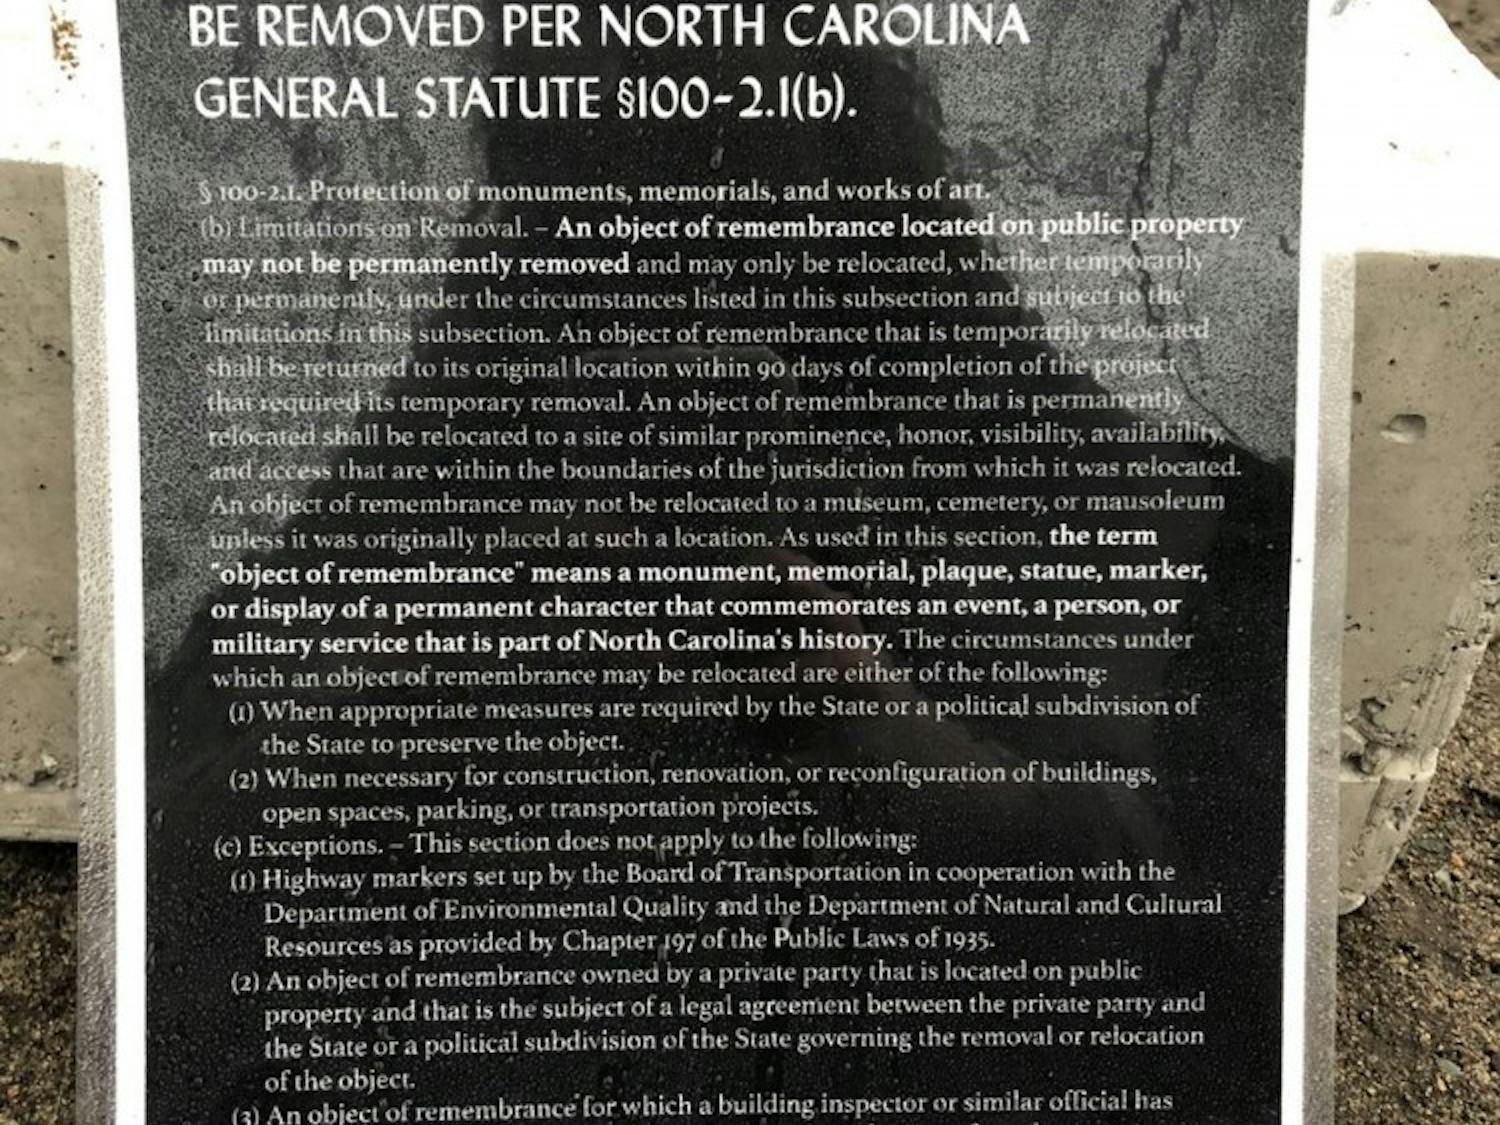 James Cates' plaque cites N.C. General Statute 100-2.1, which is commonly used as the law prohibiting Confederate monument Silent Sam’s removal, as reason that the plaque cannot be removed.